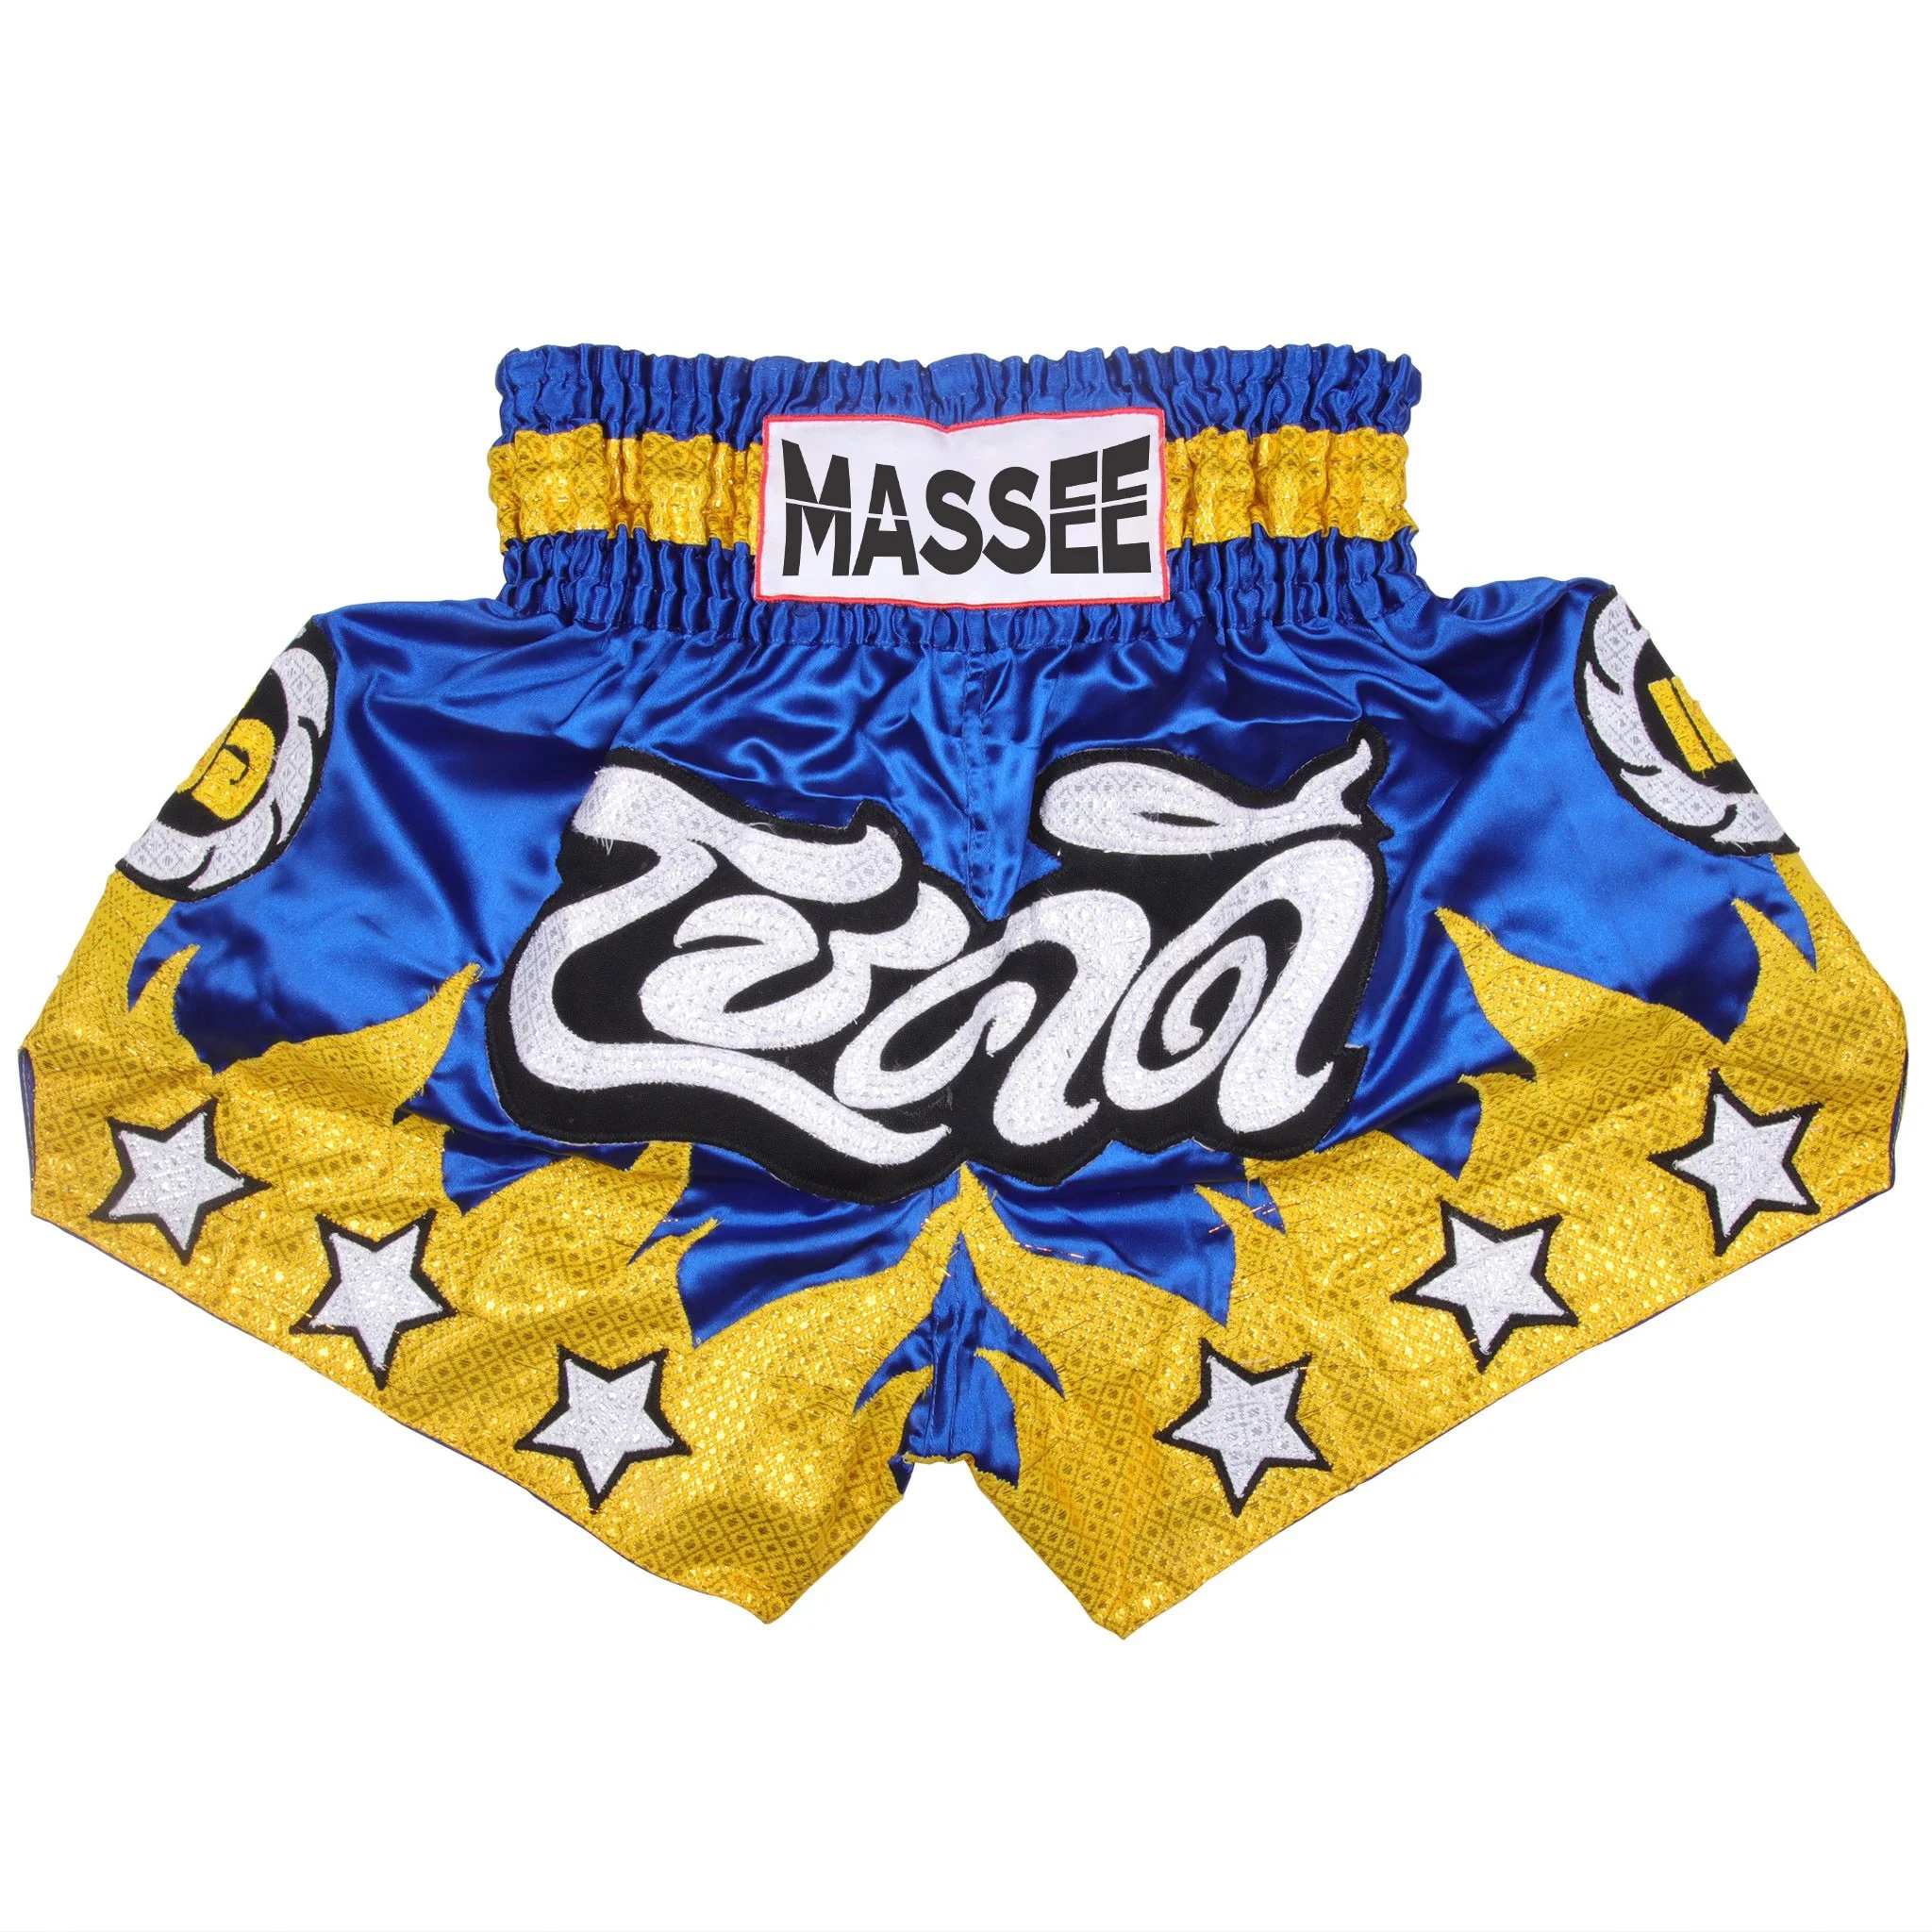 Details about   MMA Fitness Pattern Thai Boxing Sports Mma Shorts Tiger Muay Thai Clothing 